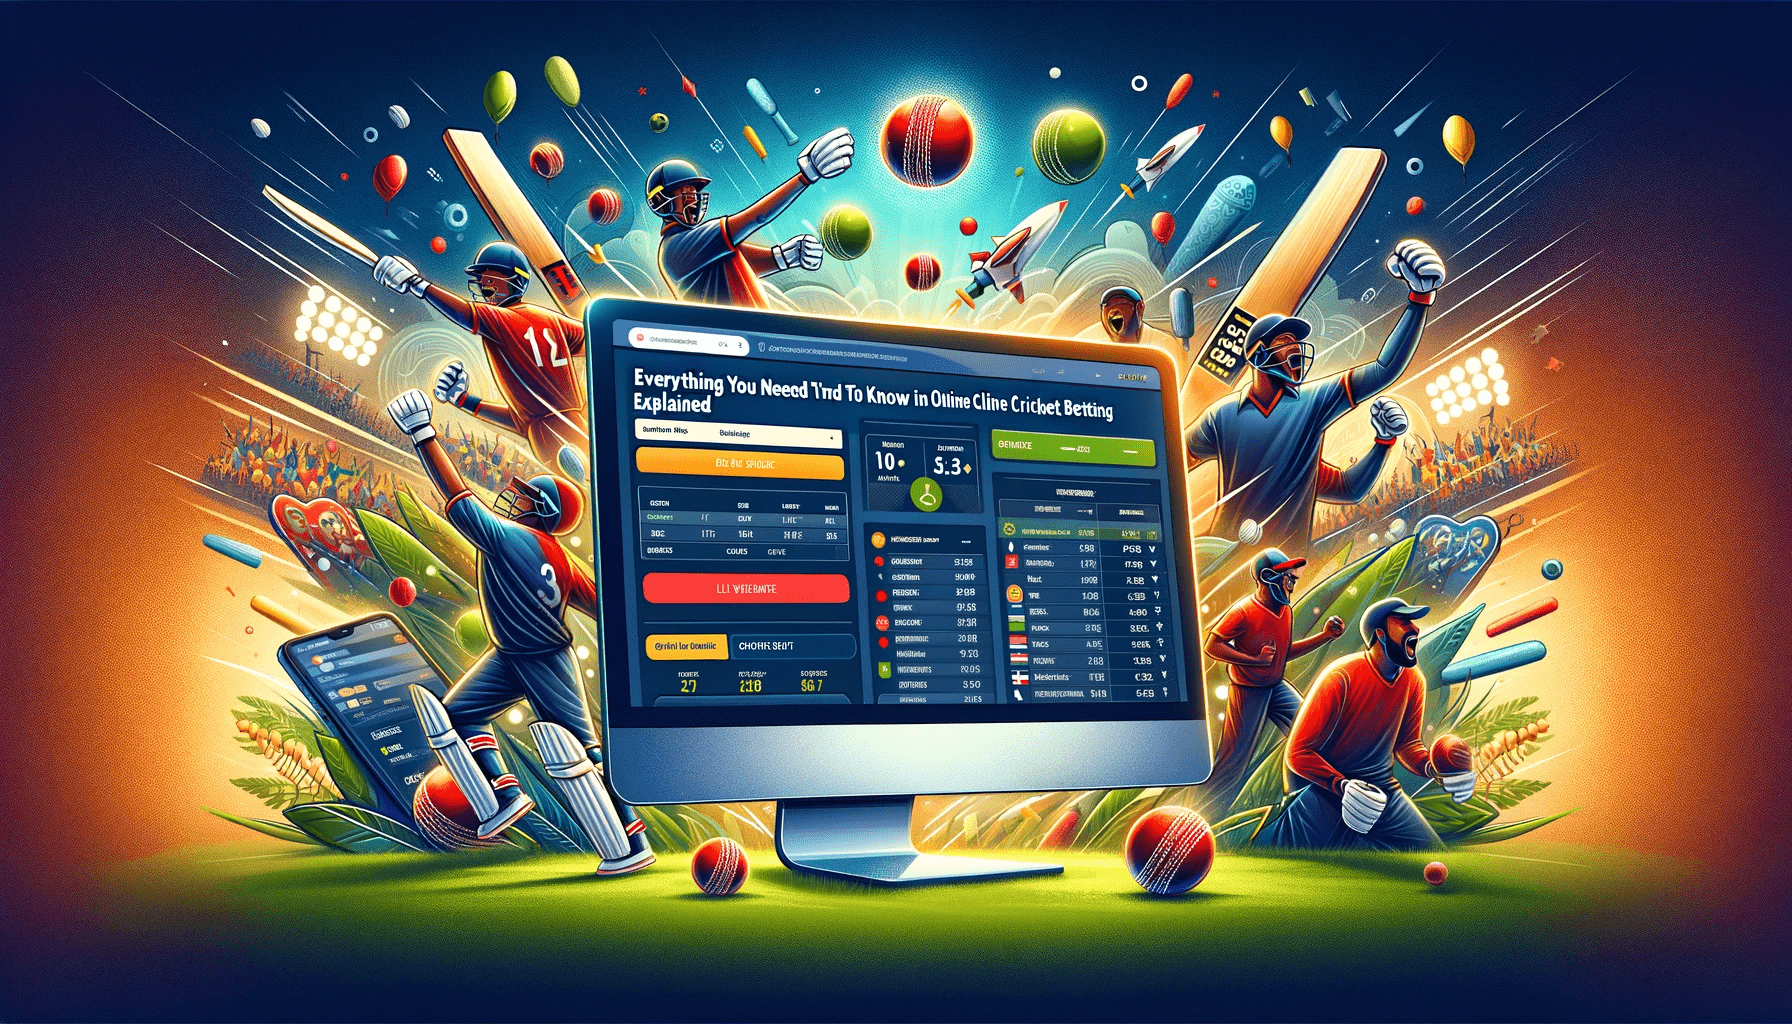 Online Cricket ID: Everything You Need to Know in Online Cricket Betting Explained